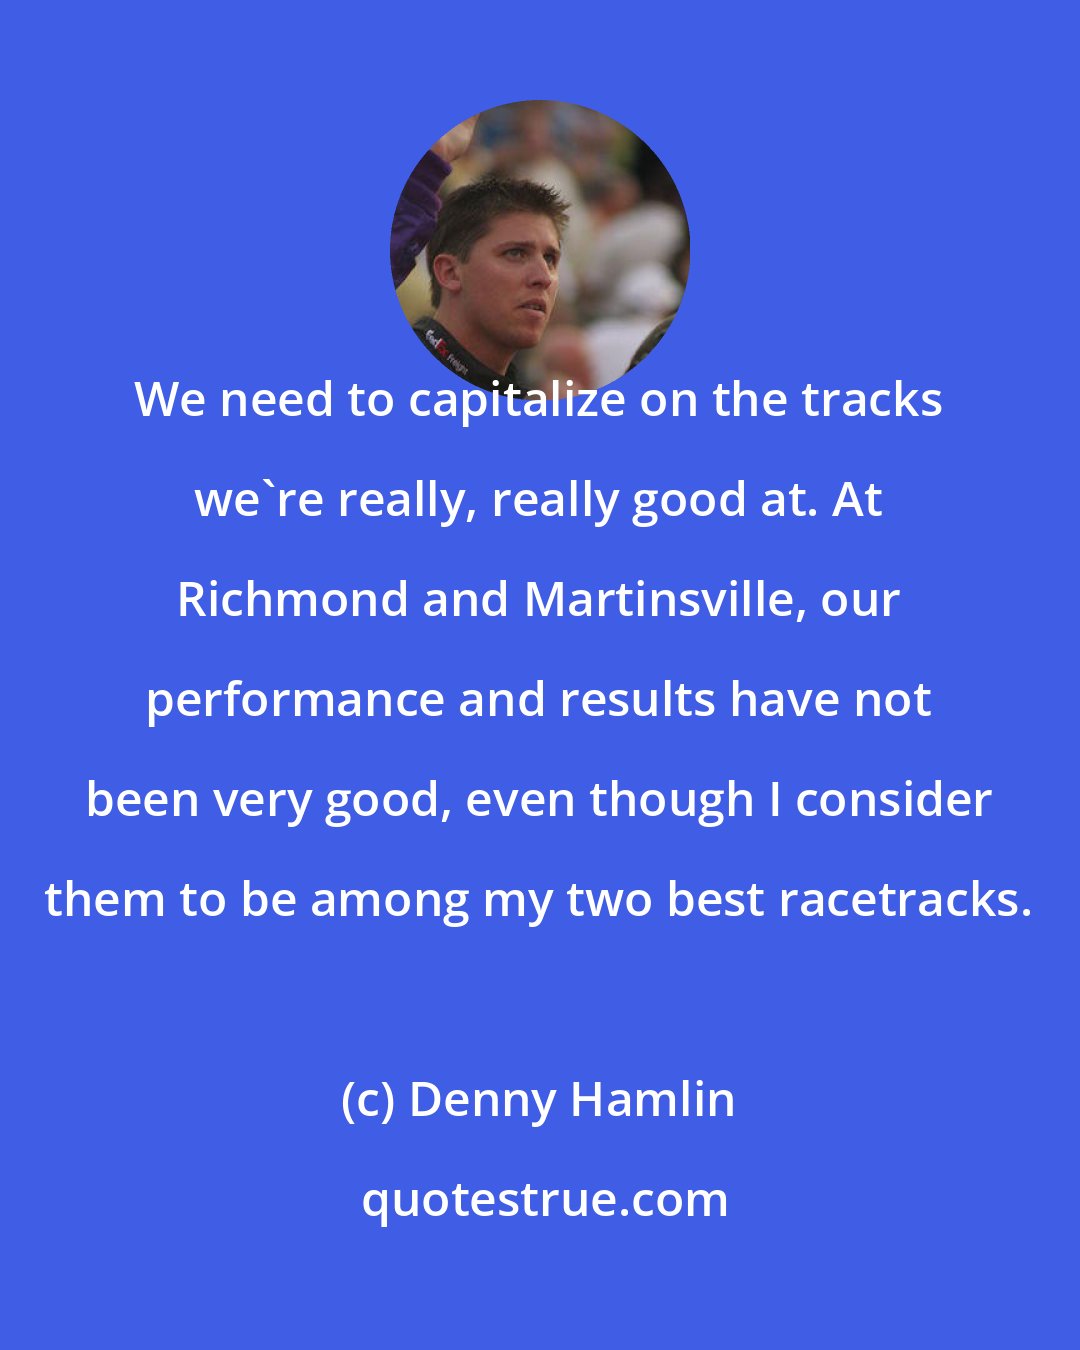 Denny Hamlin: We need to capitalize on the tracks we're really, really good at. At Richmond and Martinsville, our performance and results have not been very good, even though I consider them to be among my two best racetracks.